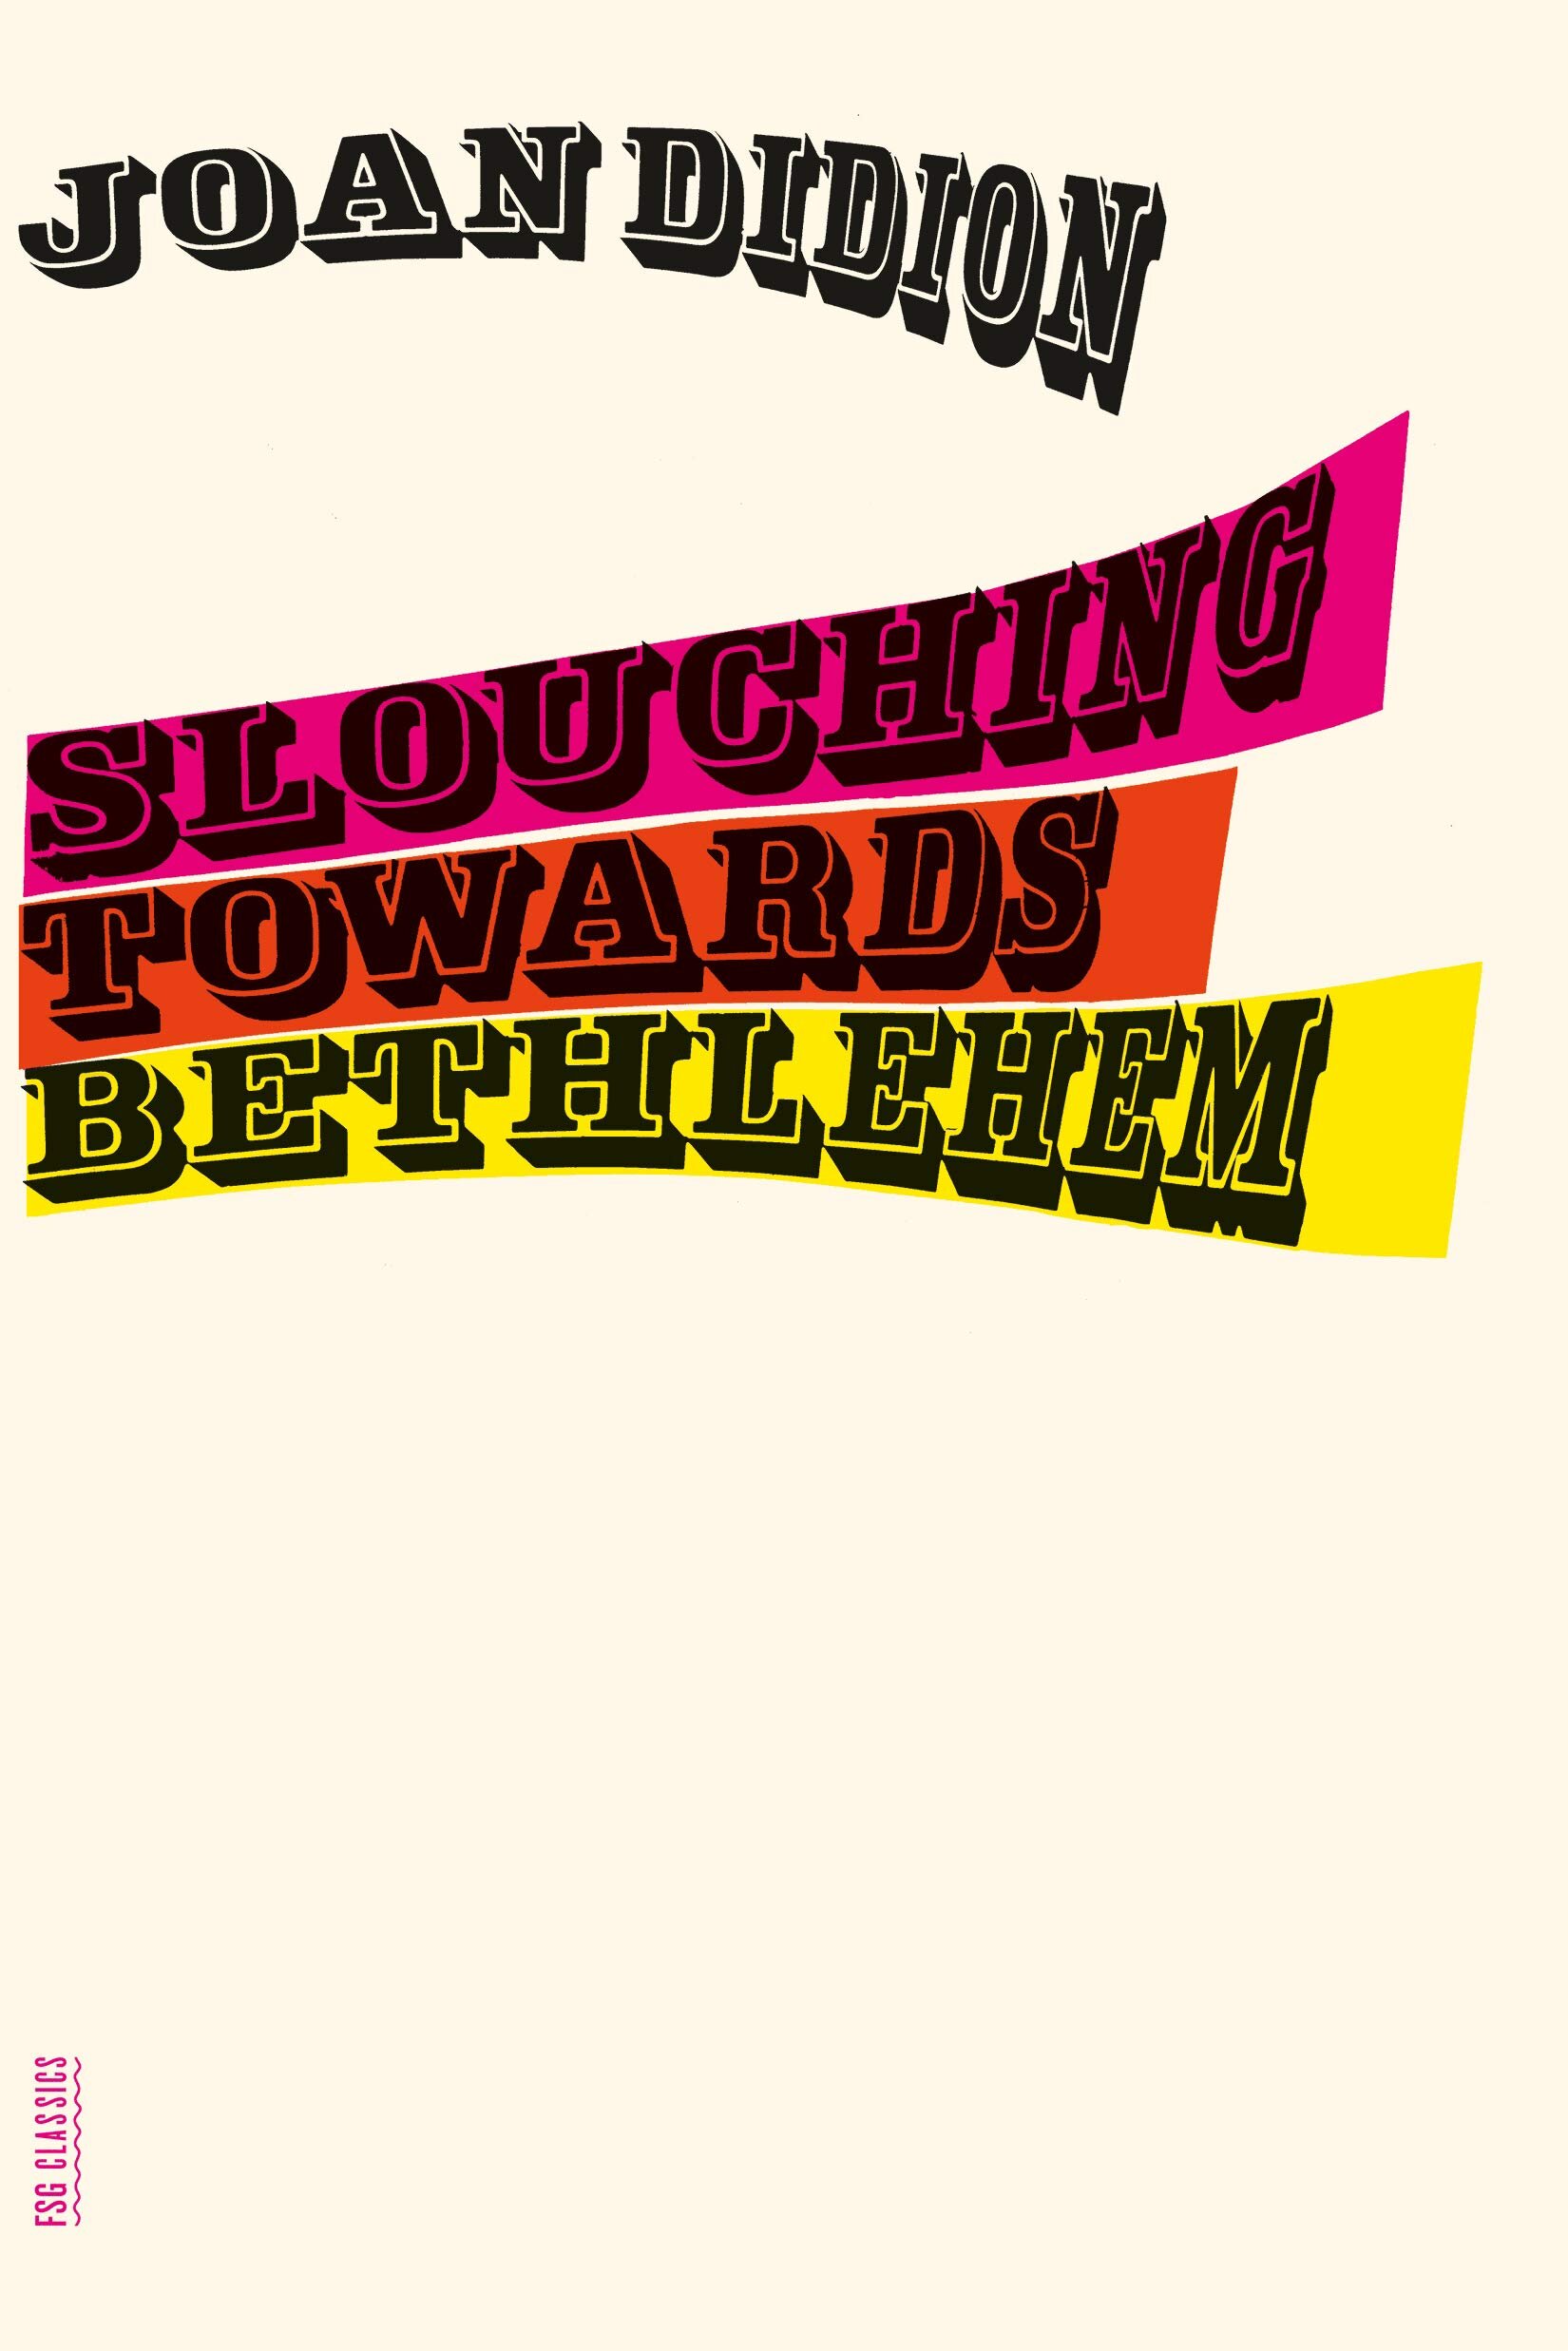 passerbuys+guide+essay+collections+joan+didion+slouching+towards+bethlehem